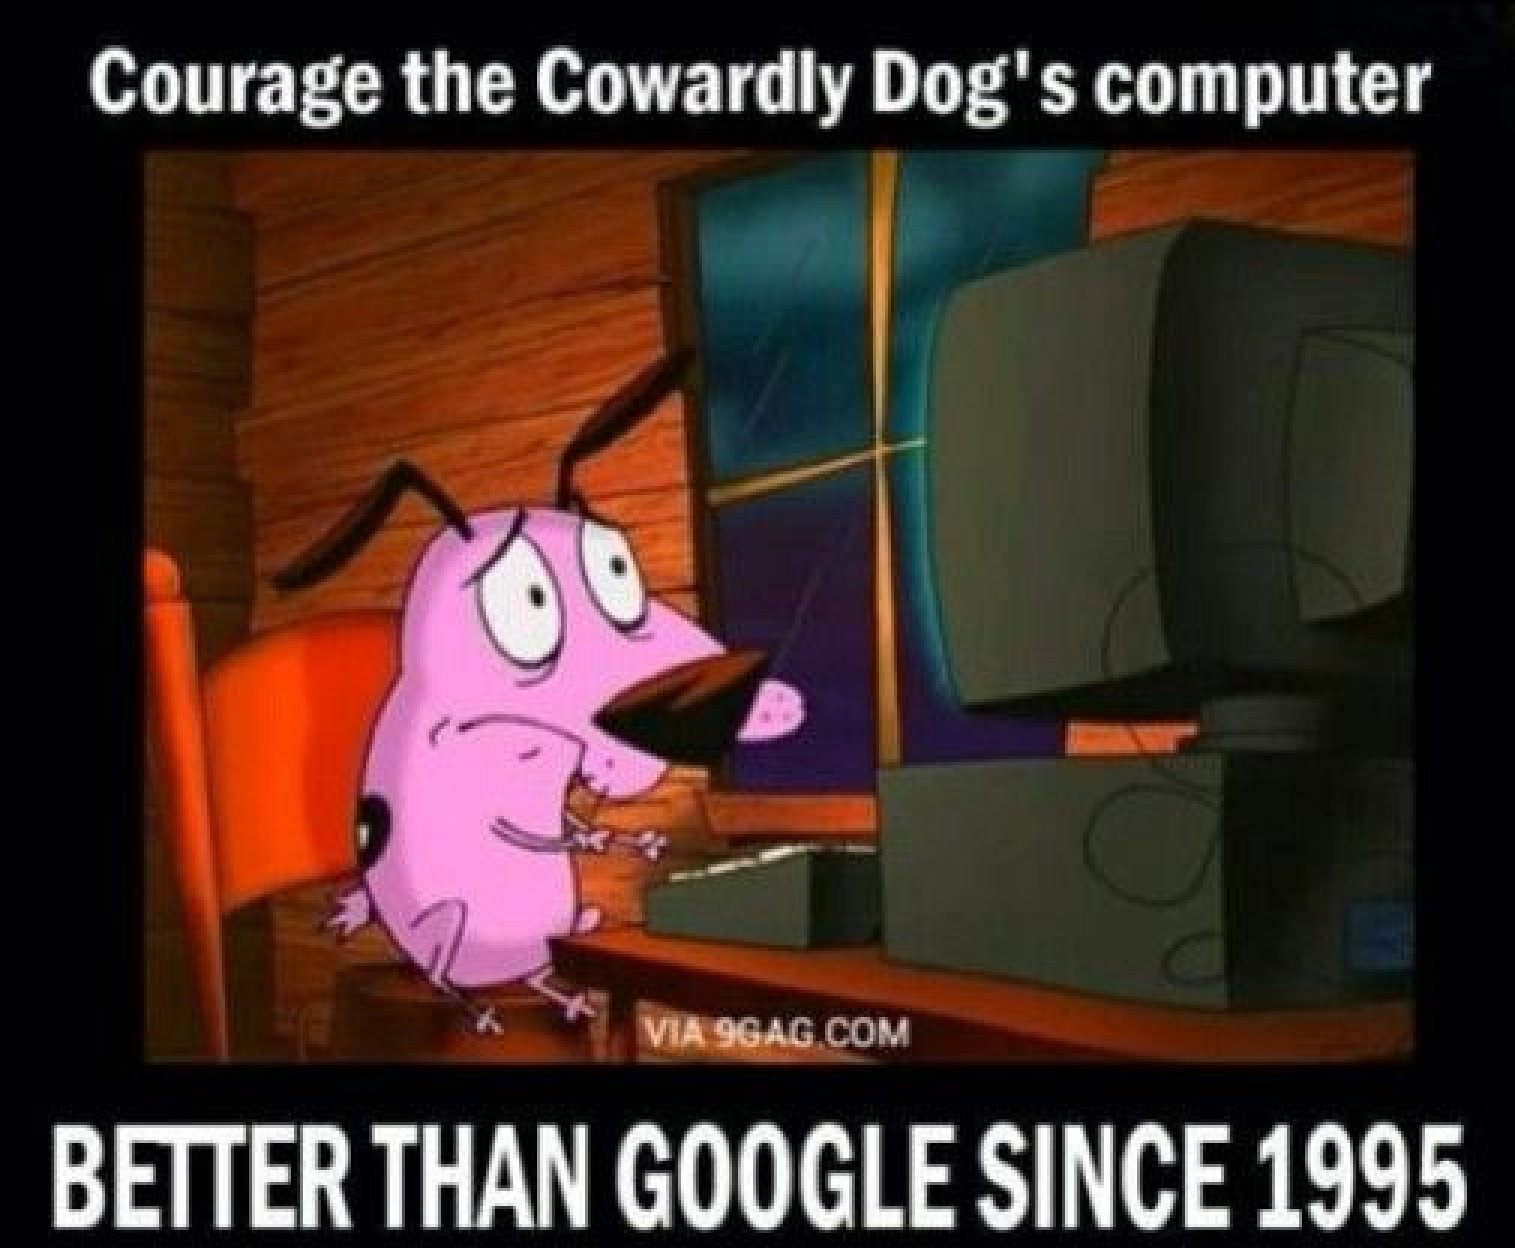 5. Courage the Cowardly Dog Blue Hair Duck - wide 10